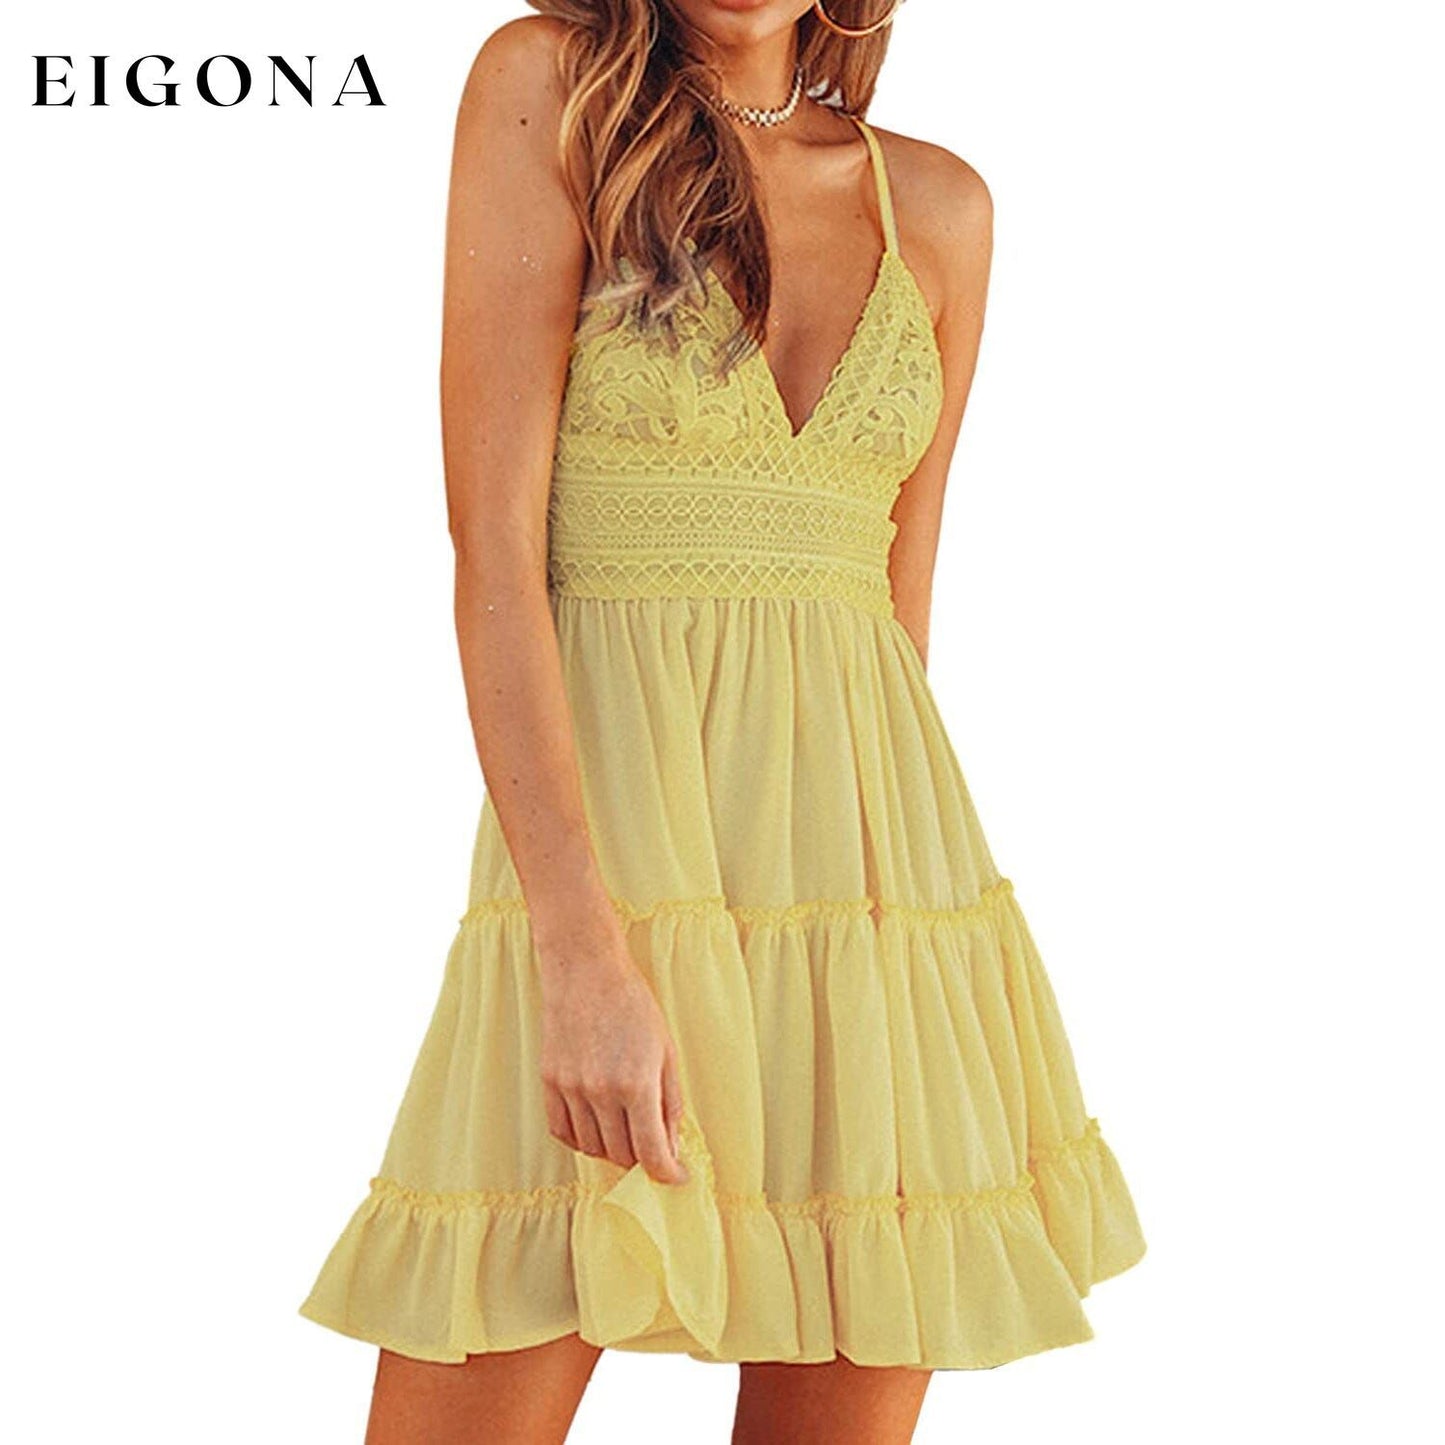 Womens V-Neck Spaghetti Strap Bowknot Backless Sleeveless Lace Mini Swing Skater Dress Yellow __stock:200 casual dresses clothes dresses refund_fee:1200